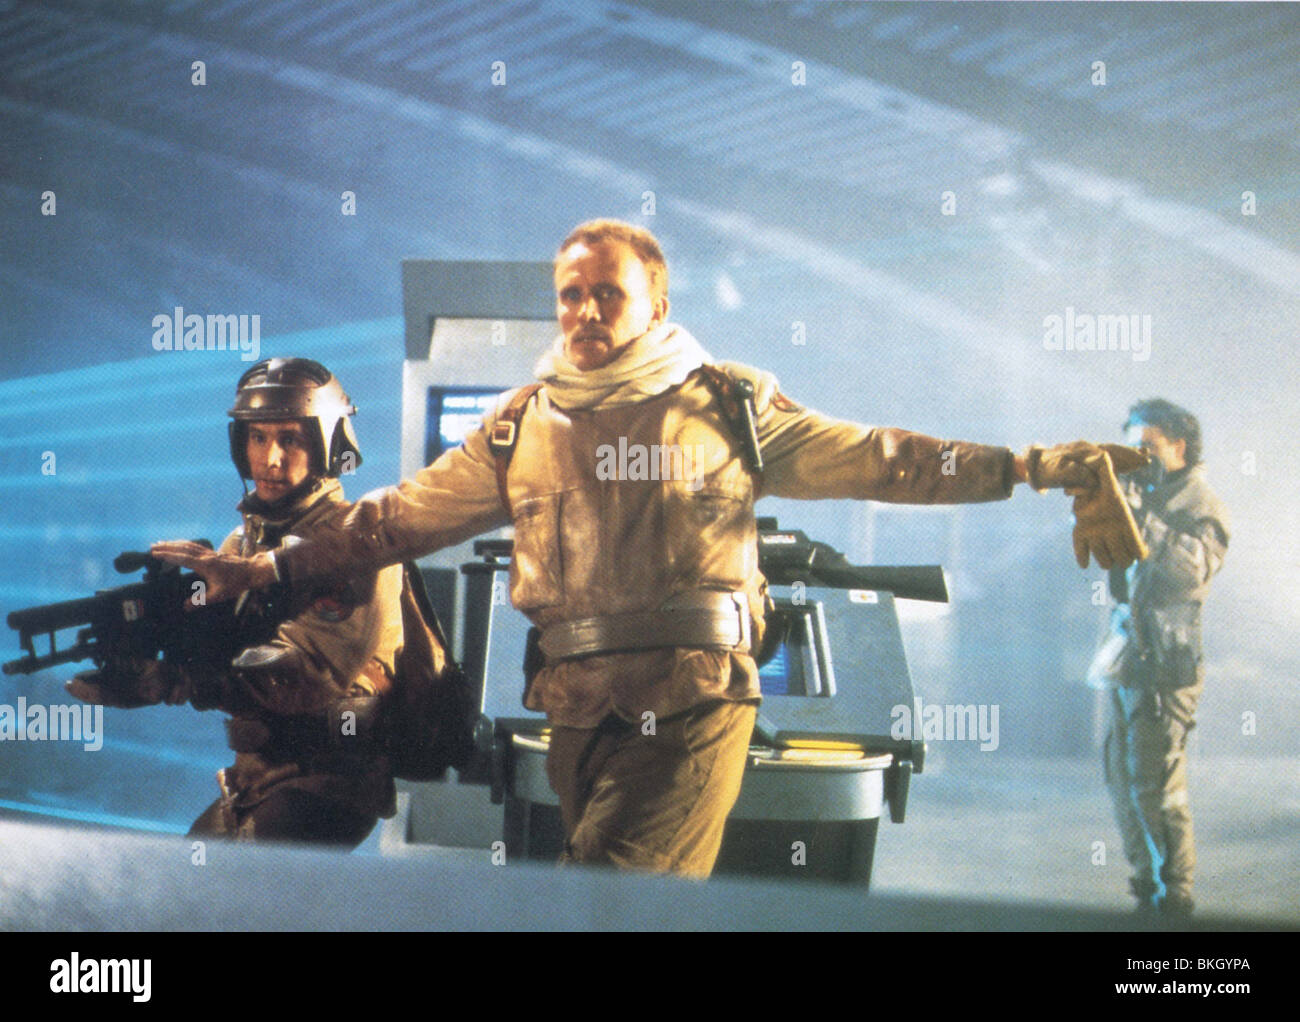 SCREAMERS (1995) ANDY LAUER, PETER WELLER, ROY DUPUIS SCER 005FOH Stock Photo